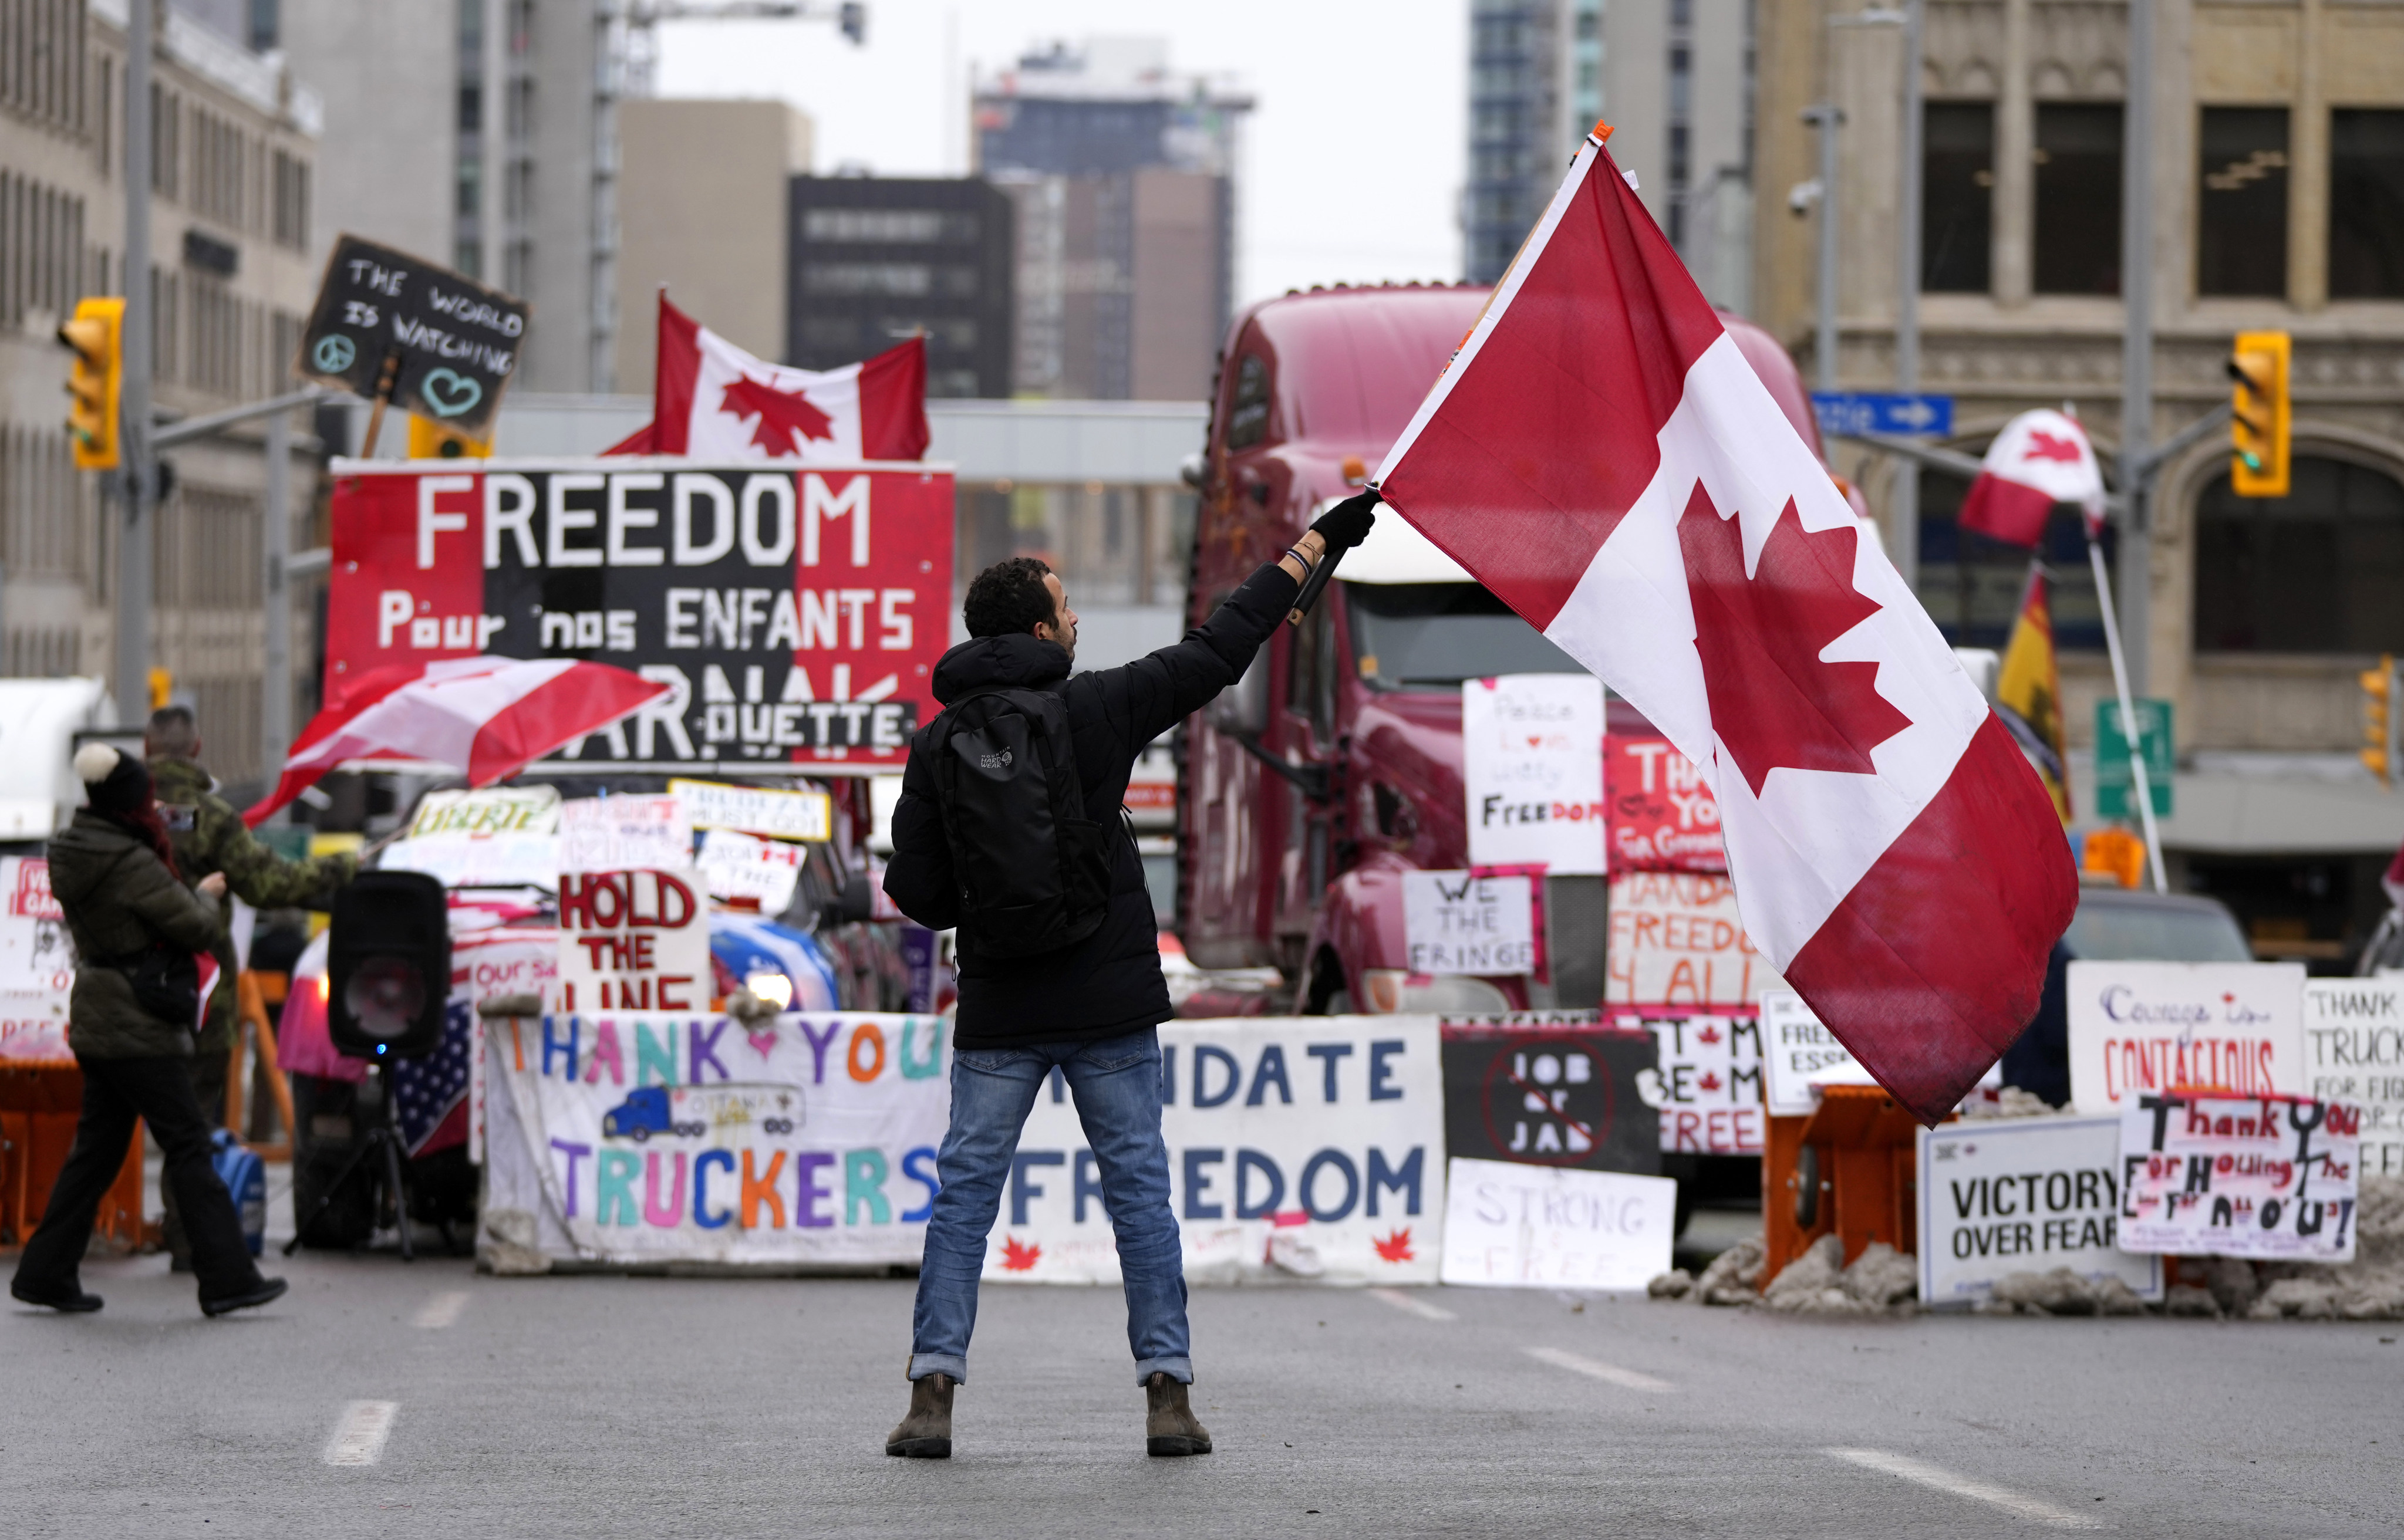 A protester waves a Canadian flag in front of parked vehicles in Ottawa in February. Photo: The Canadian Press via AP